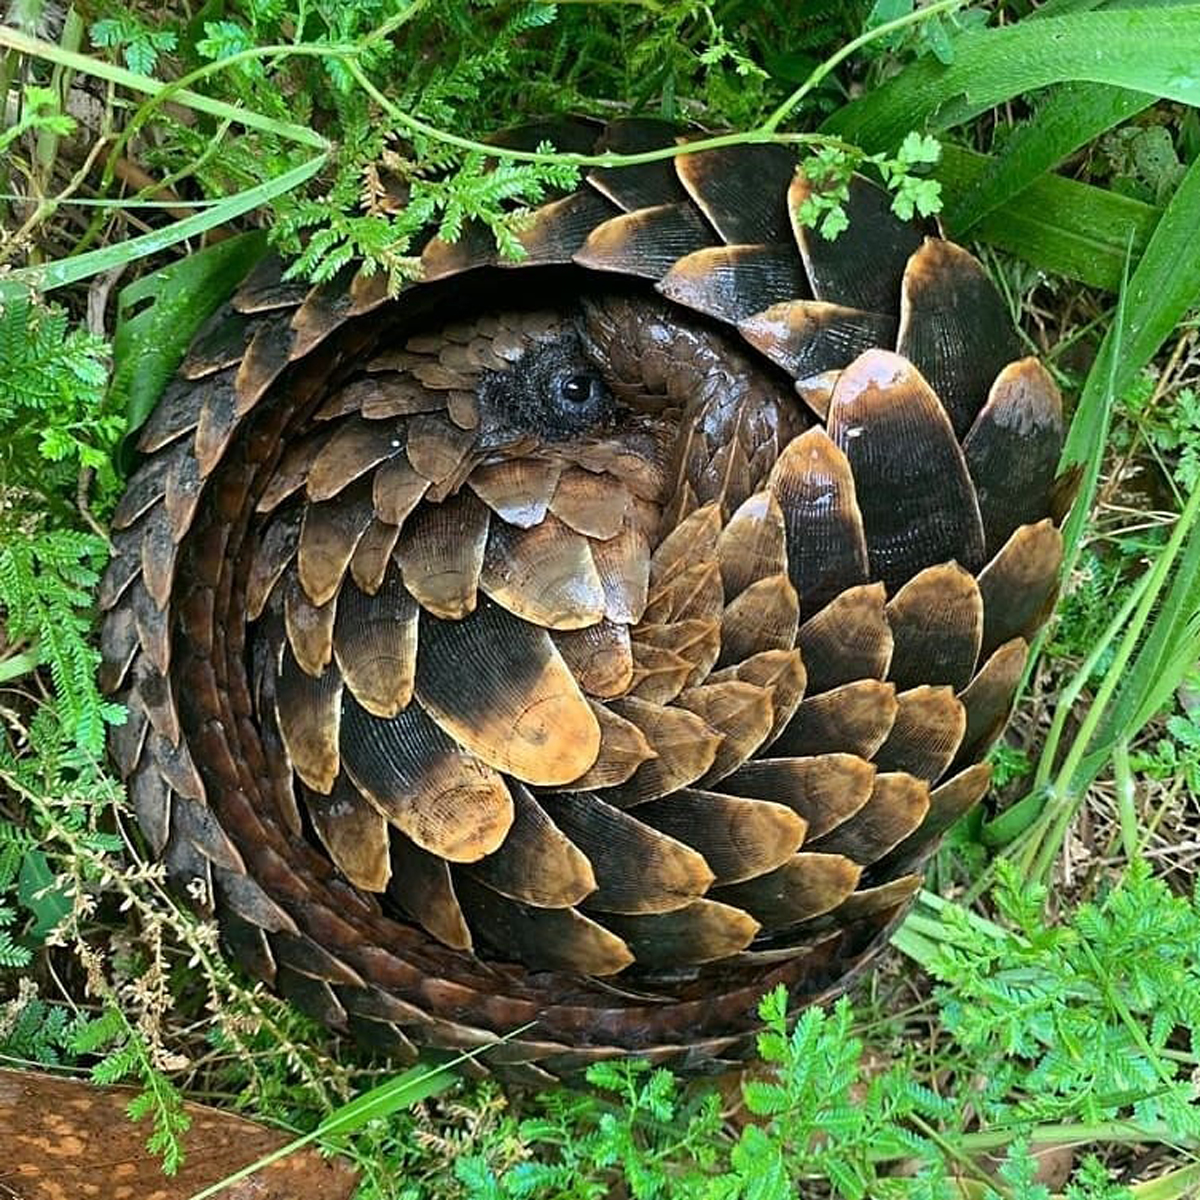 A rescued and released black-bellied pangolin in Cameroon © Angelia Young / Tikki Hywood Foundation